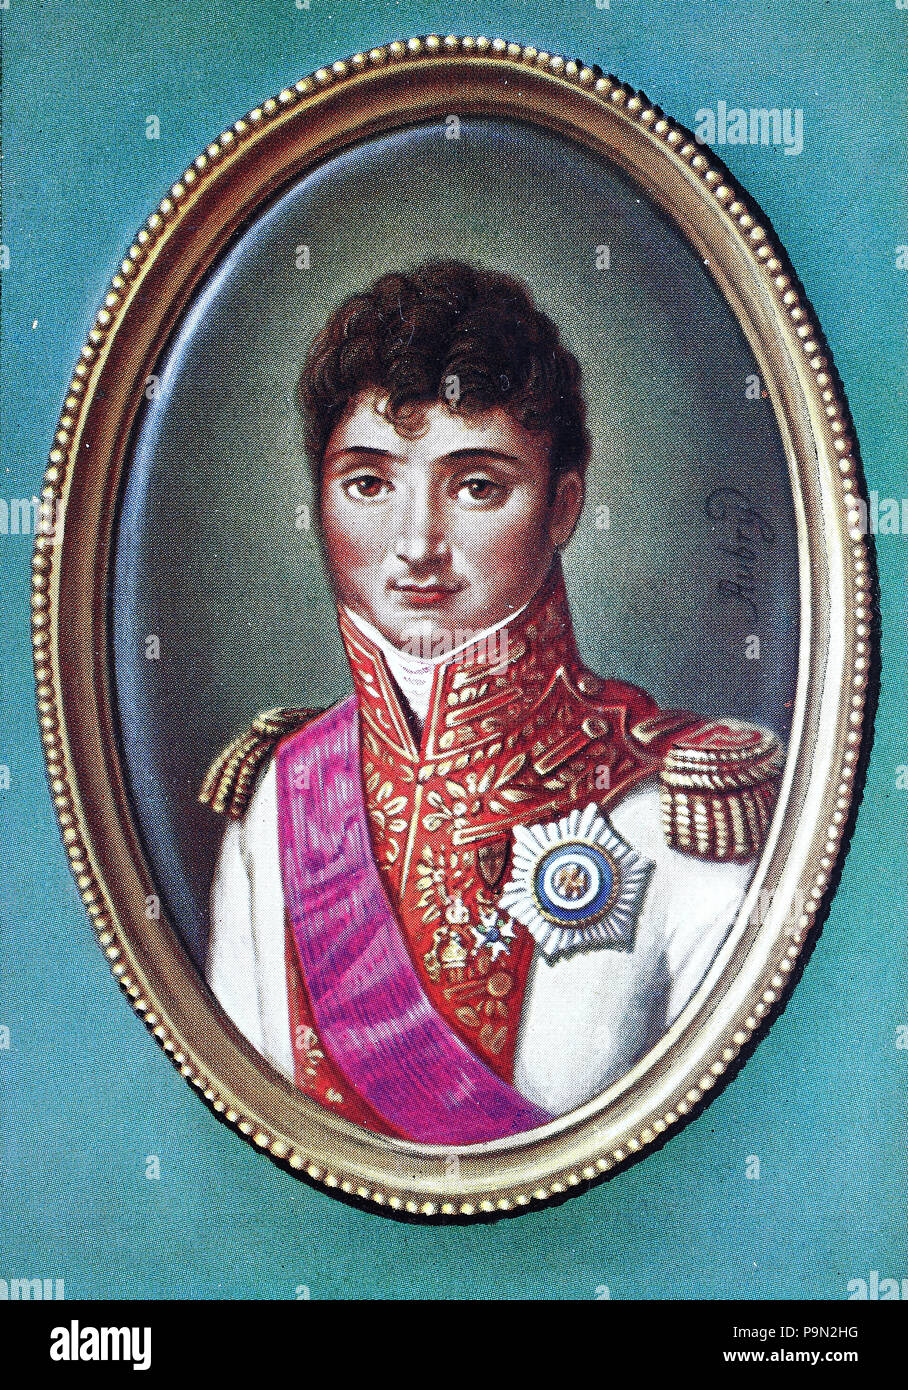 JÃ©rÃ´me-NapolÃ©on Bonaparte, born Girolamo Buonaparte, 15 November 1784 â€“ 24 June 1860, was the youngest brother of Napoleon I and reigned as Jerome I, formally Hieronymus Napoleon in German, King of Westphalia, between 1807 and 1813. From 1816 onward, he bore the title of Prince of Montfort, digital improved reproduction of an original print from the year 1900 Stock Photo